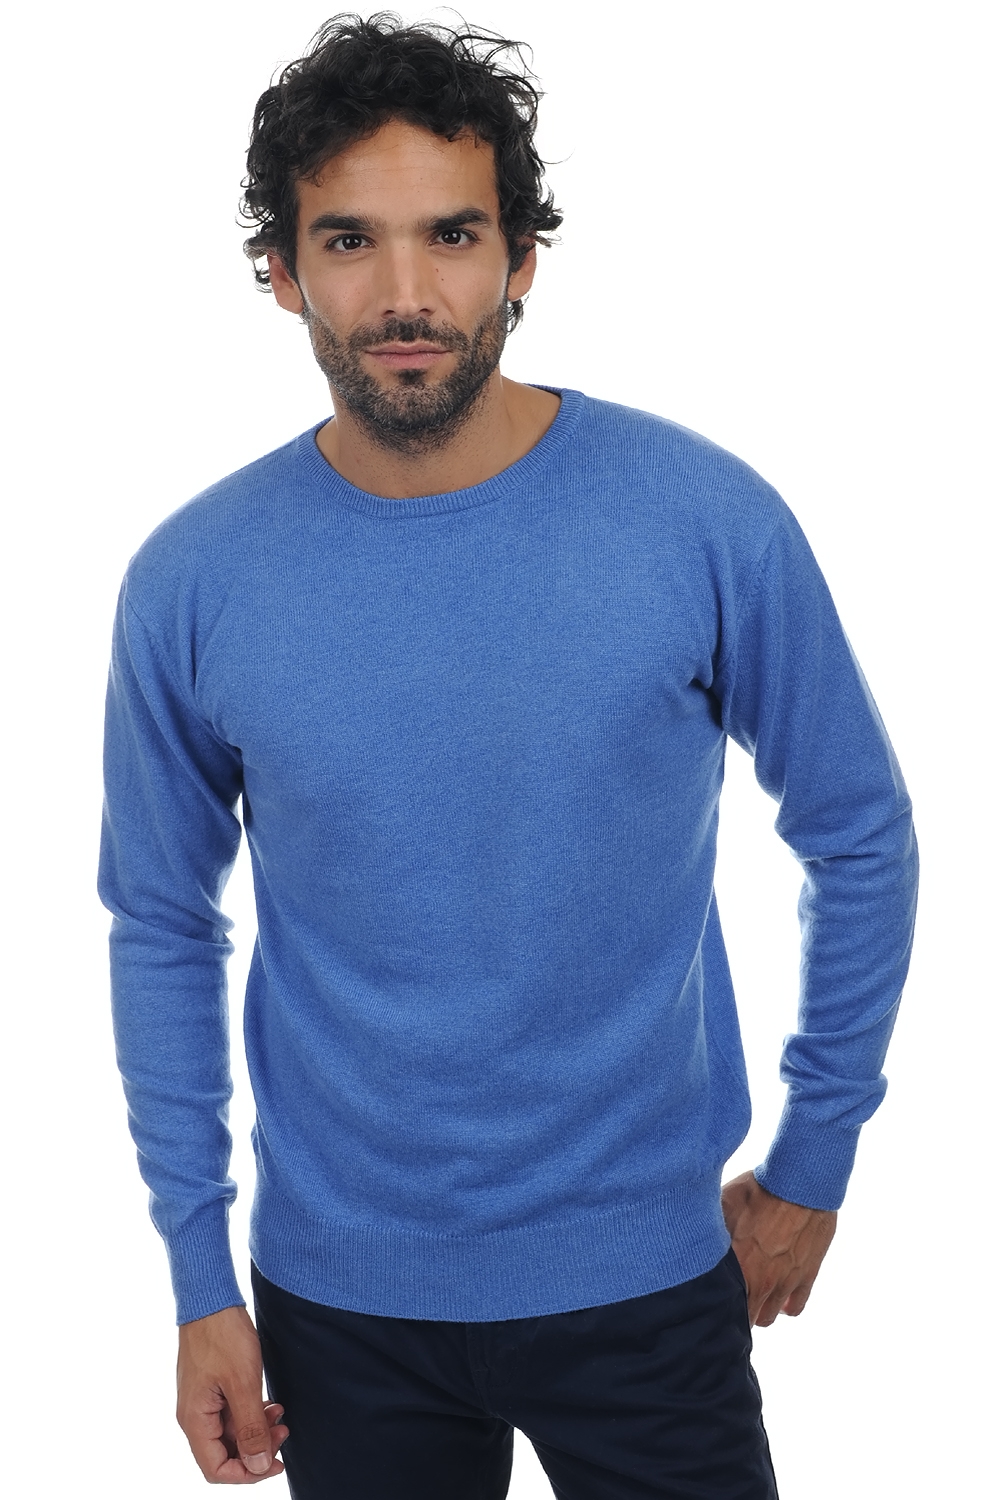 Cachemire pull homme col rond keaton bleu chine 2xl